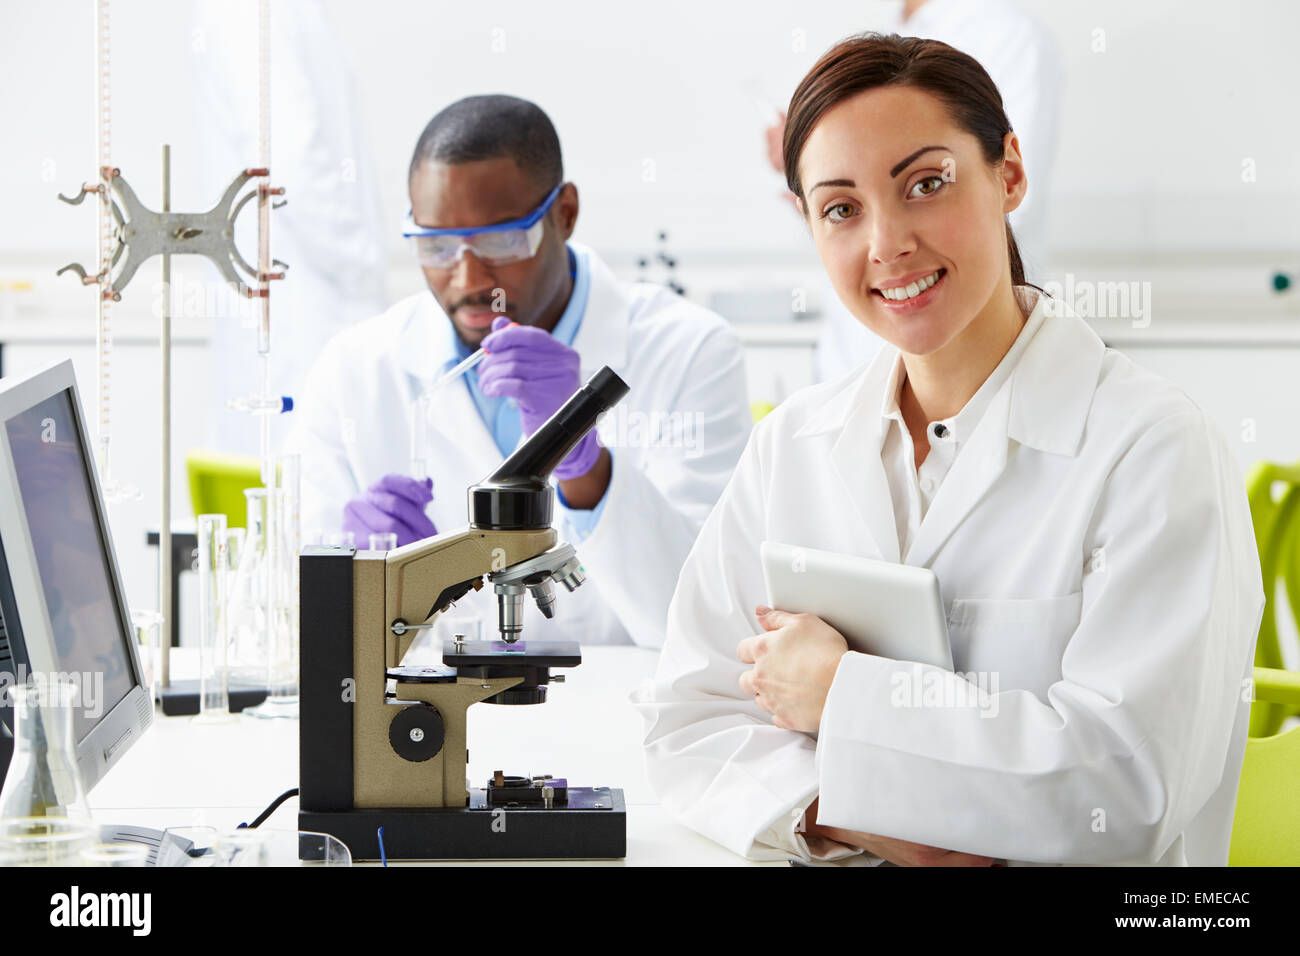 Technicians Carrying Out Research In Laboratory Stock Photo